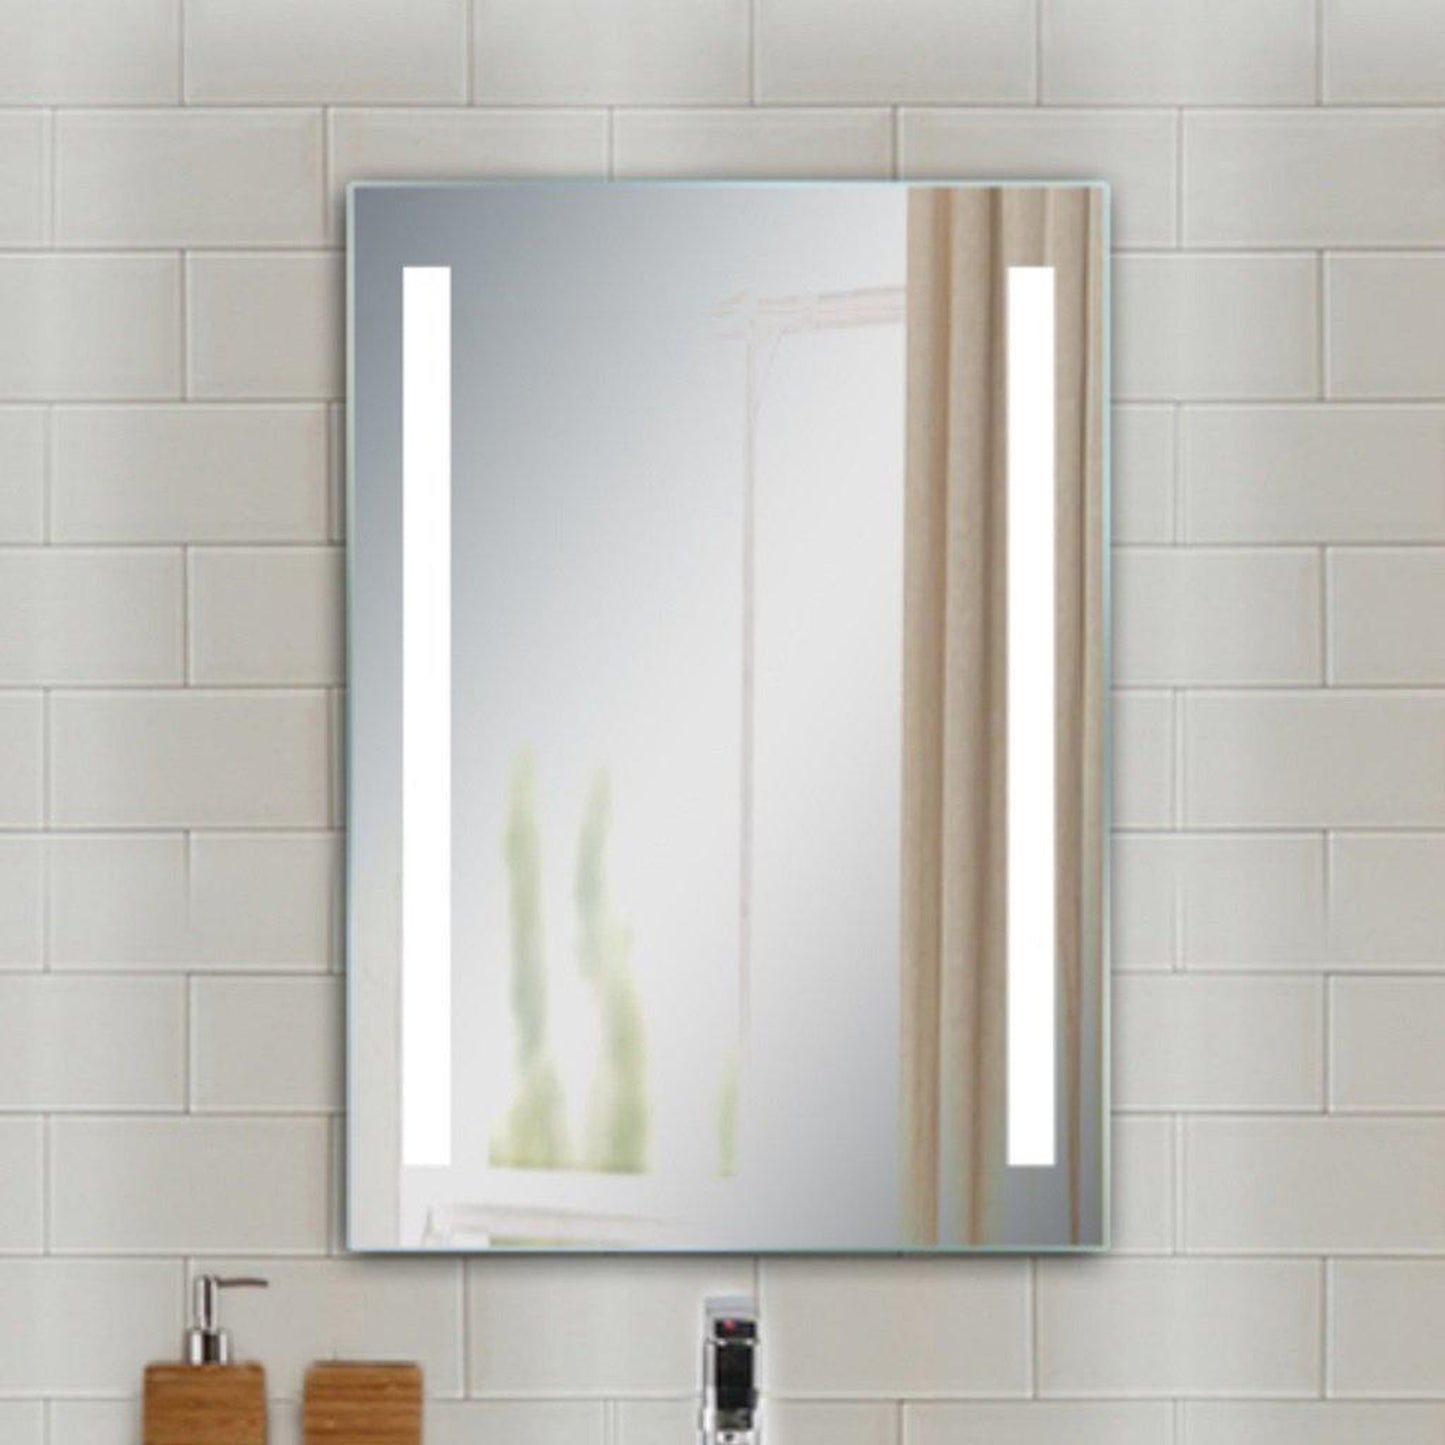 Lighted Impressions Maxx 20" x 28" Rectangular Frameless Wall-Mounted LED Mirror With 3-Way Rocker Switch